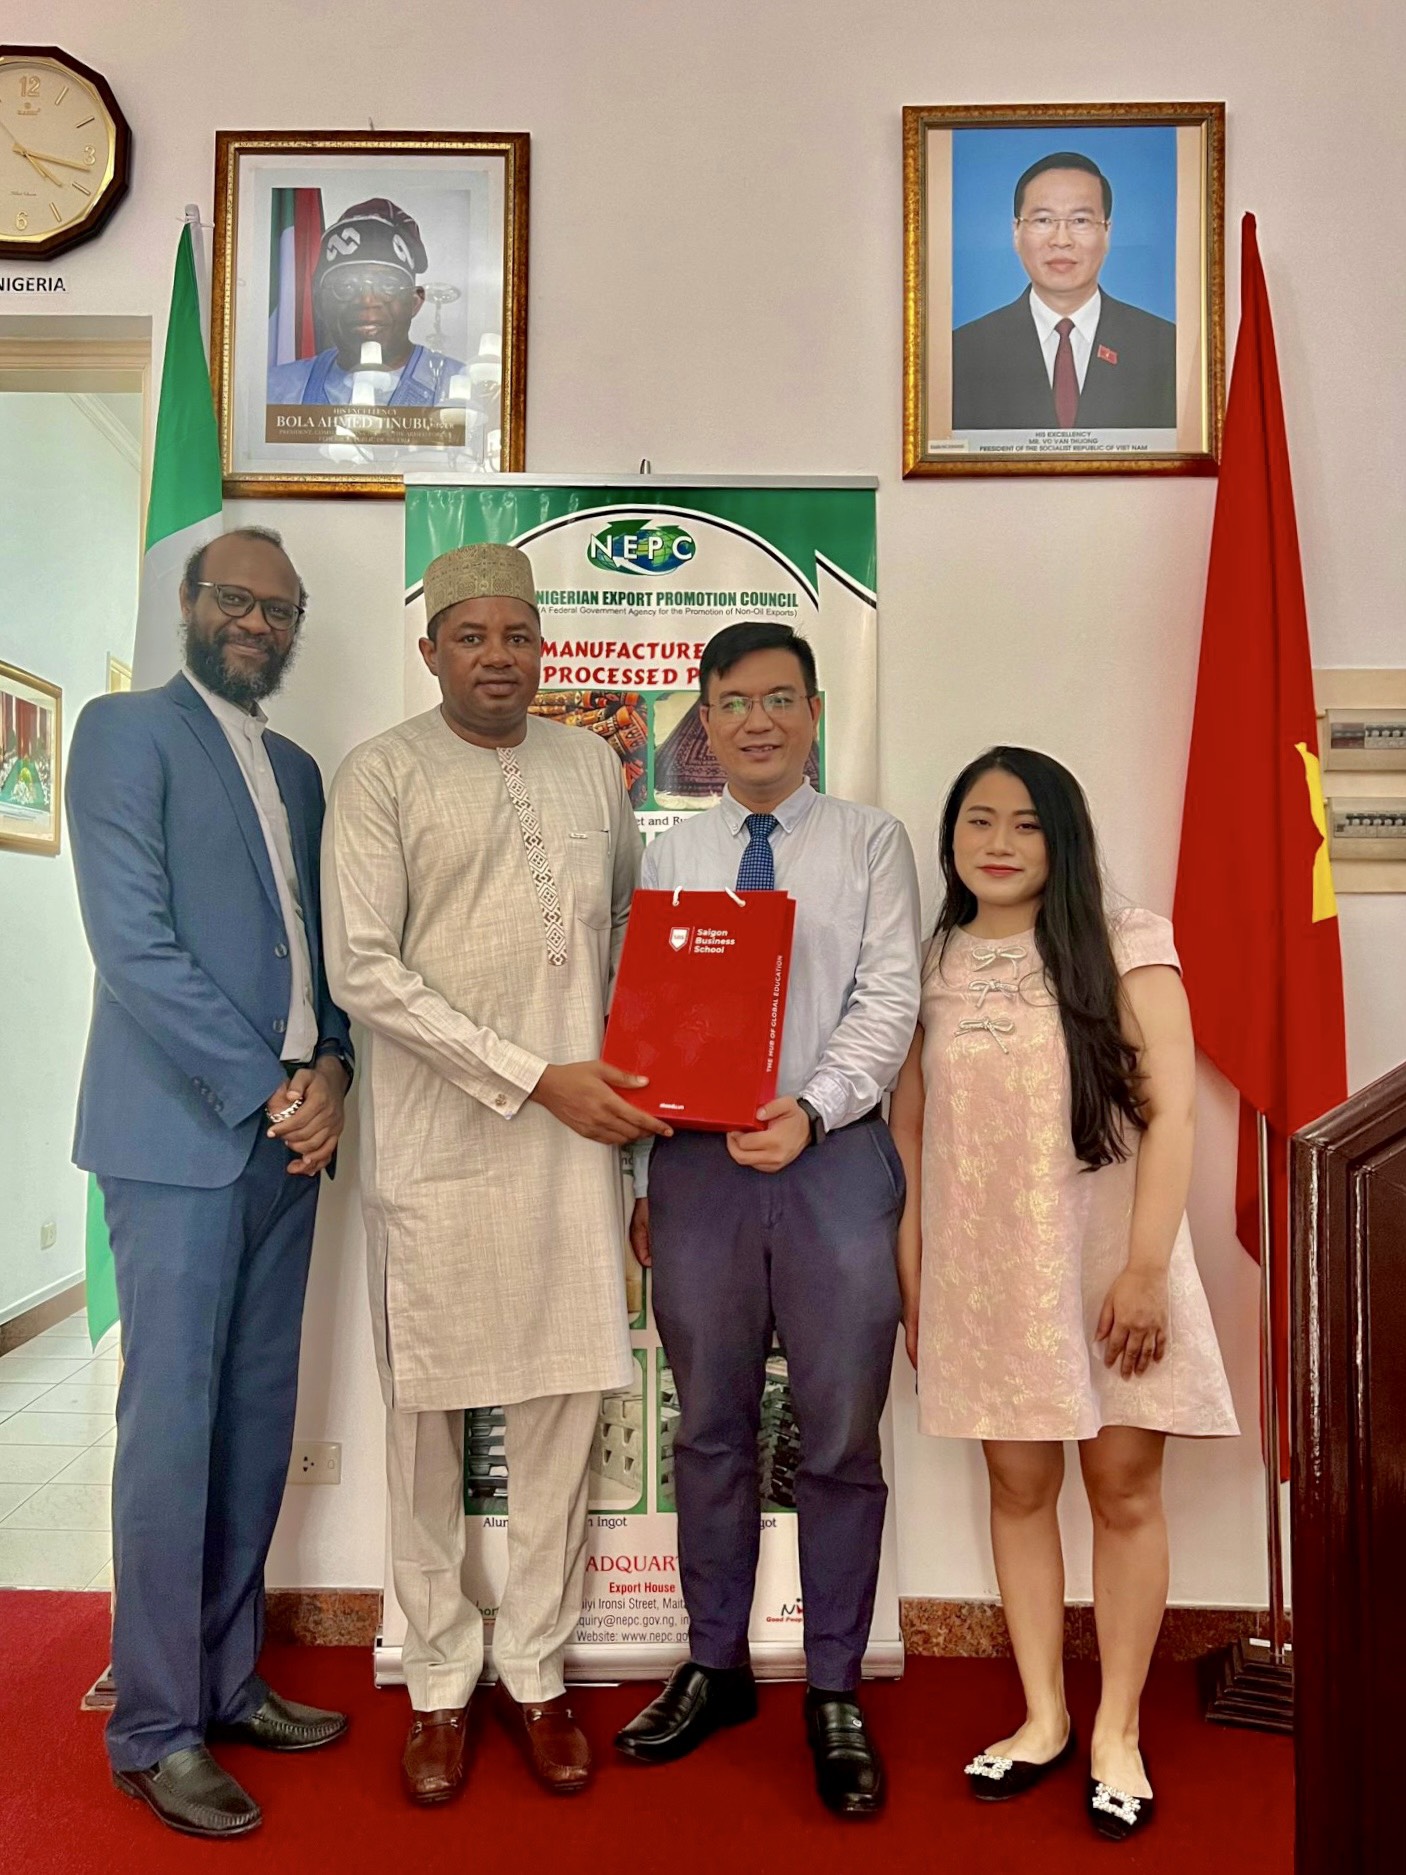 REPRESENTATIVES FROM SAIGON BUSINESS SCHOOL MET WITH COUNSELOR, HEAD OF THE CHANCERY OF THE NIGERIAN EMBASSY IN VIETNAM